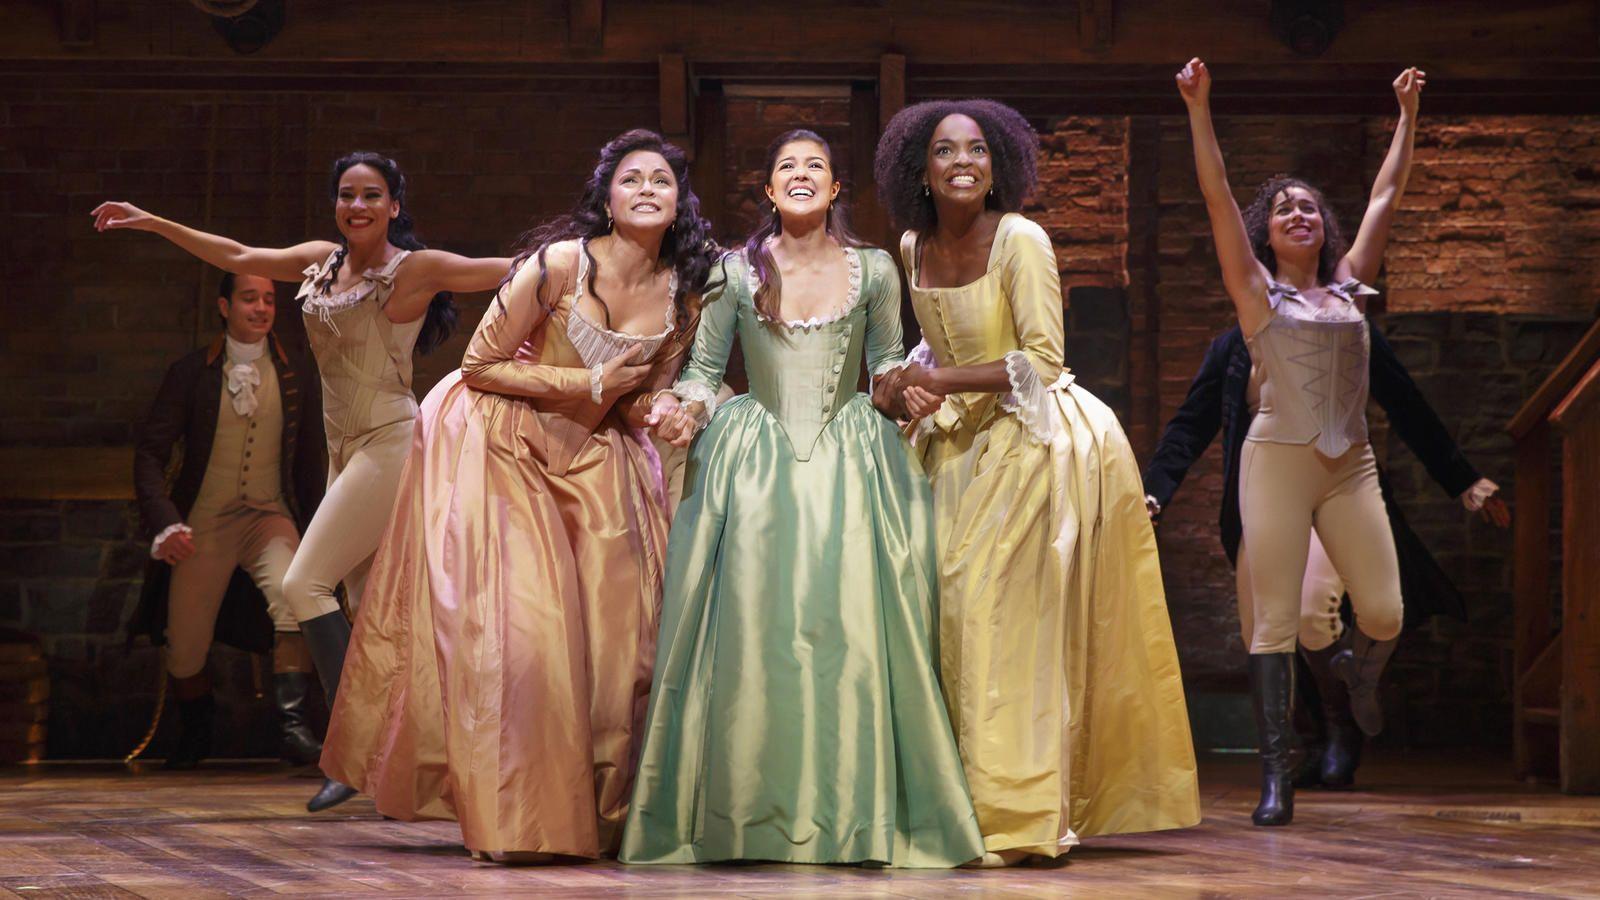 When It Comes to Diversity, Why Does Broadway Beat Hollywood?